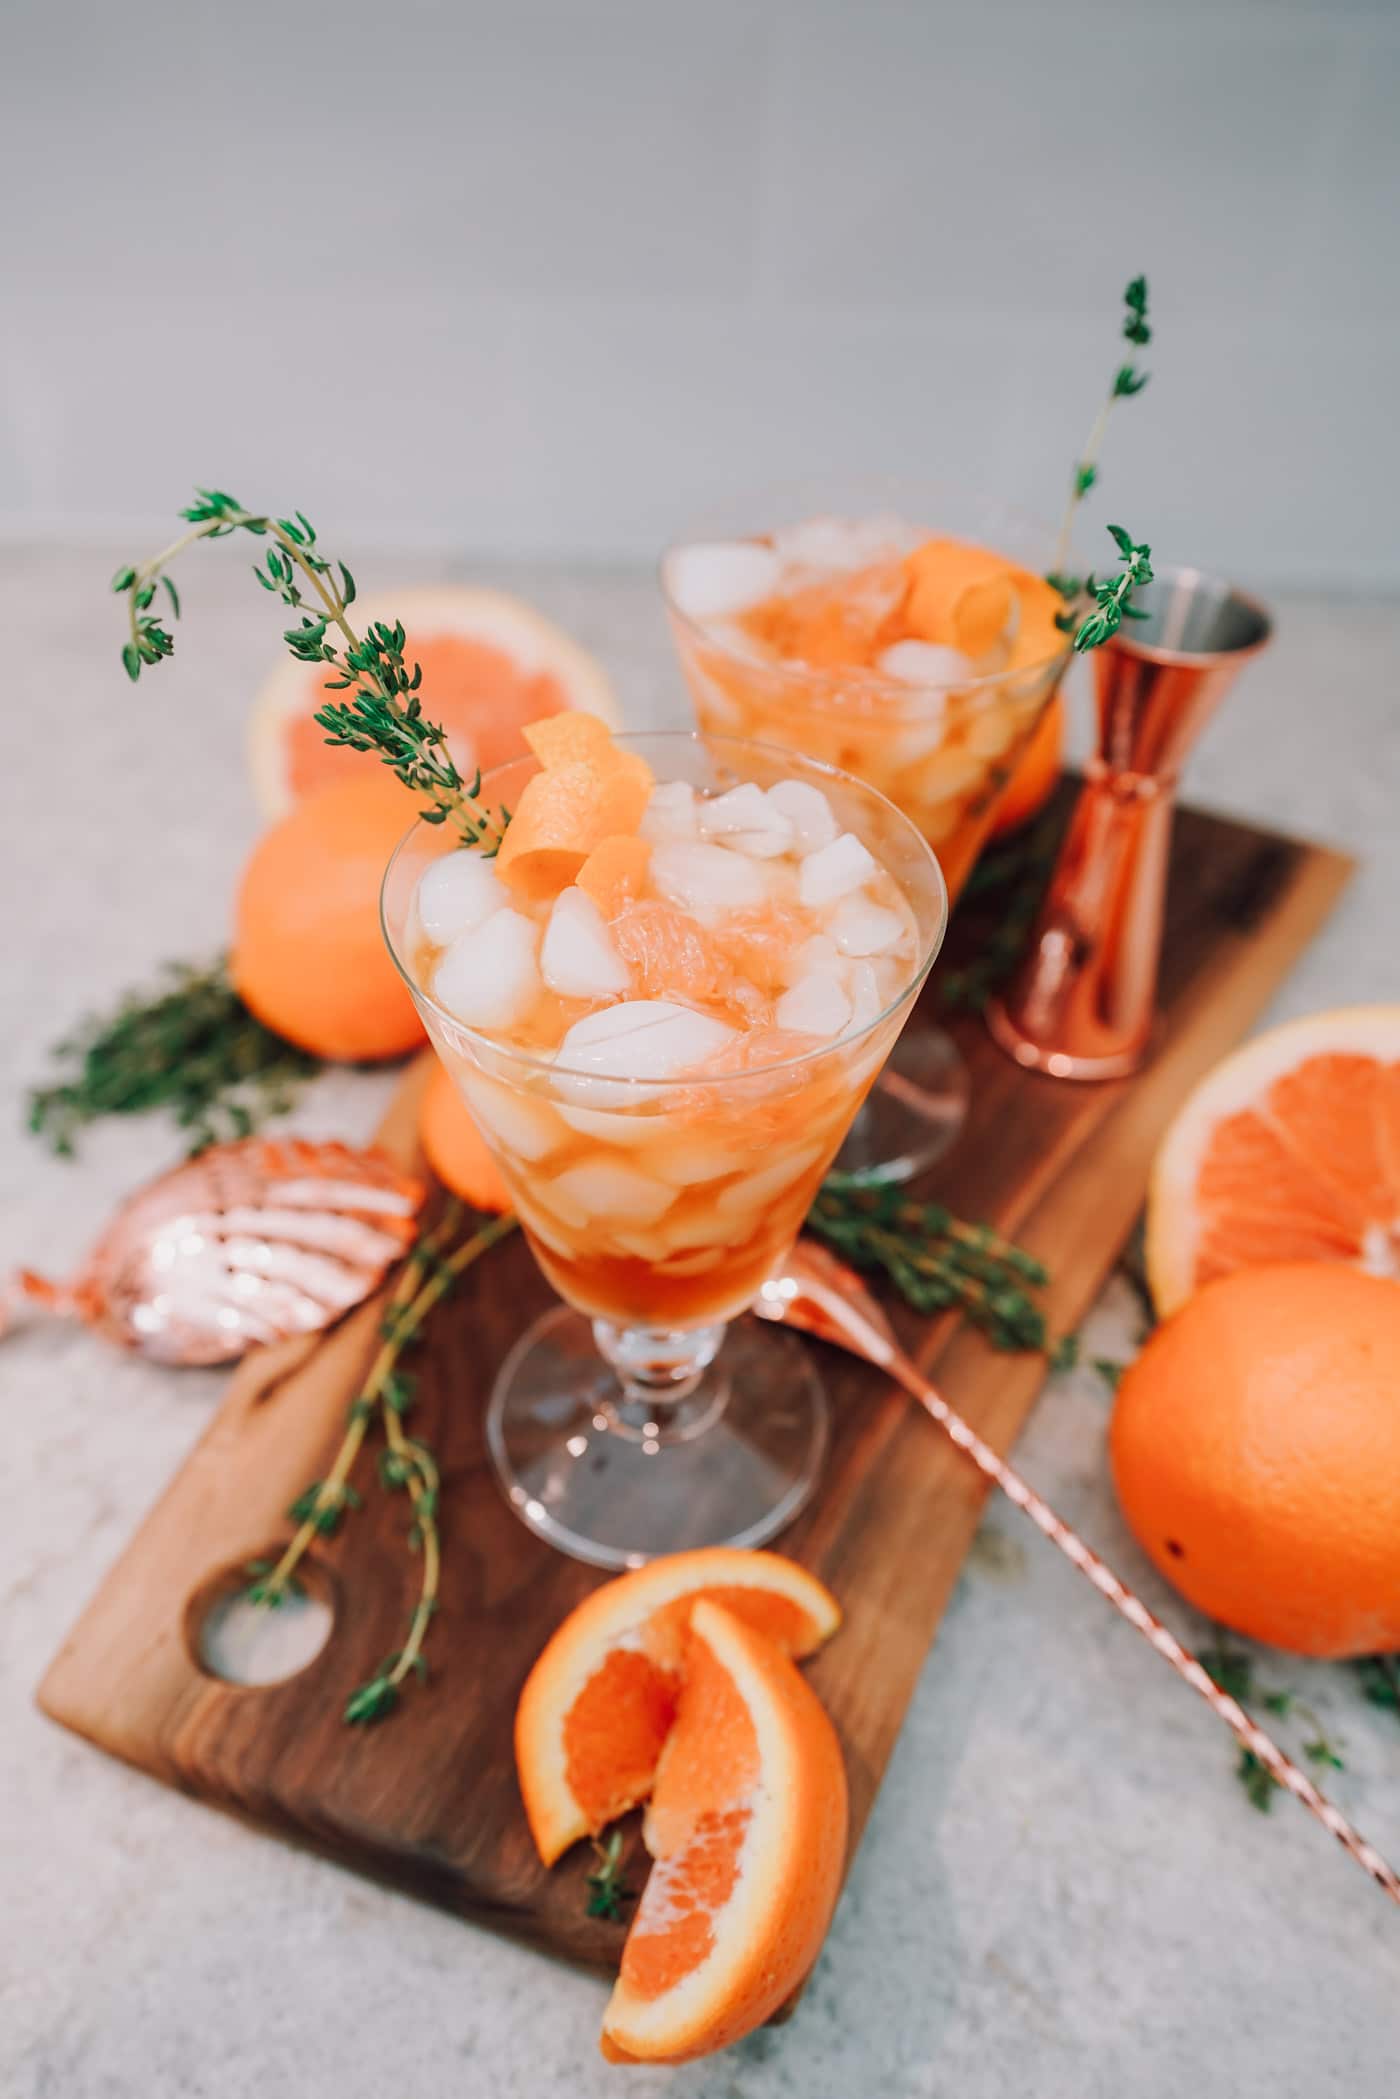 This cocktail is by far one of the best old fashioned recipe you'll try to date! It's perfect for entertaining this holiday season! See details inside! #cocktailrecipe #oldfashioned #cocktail #whiskey